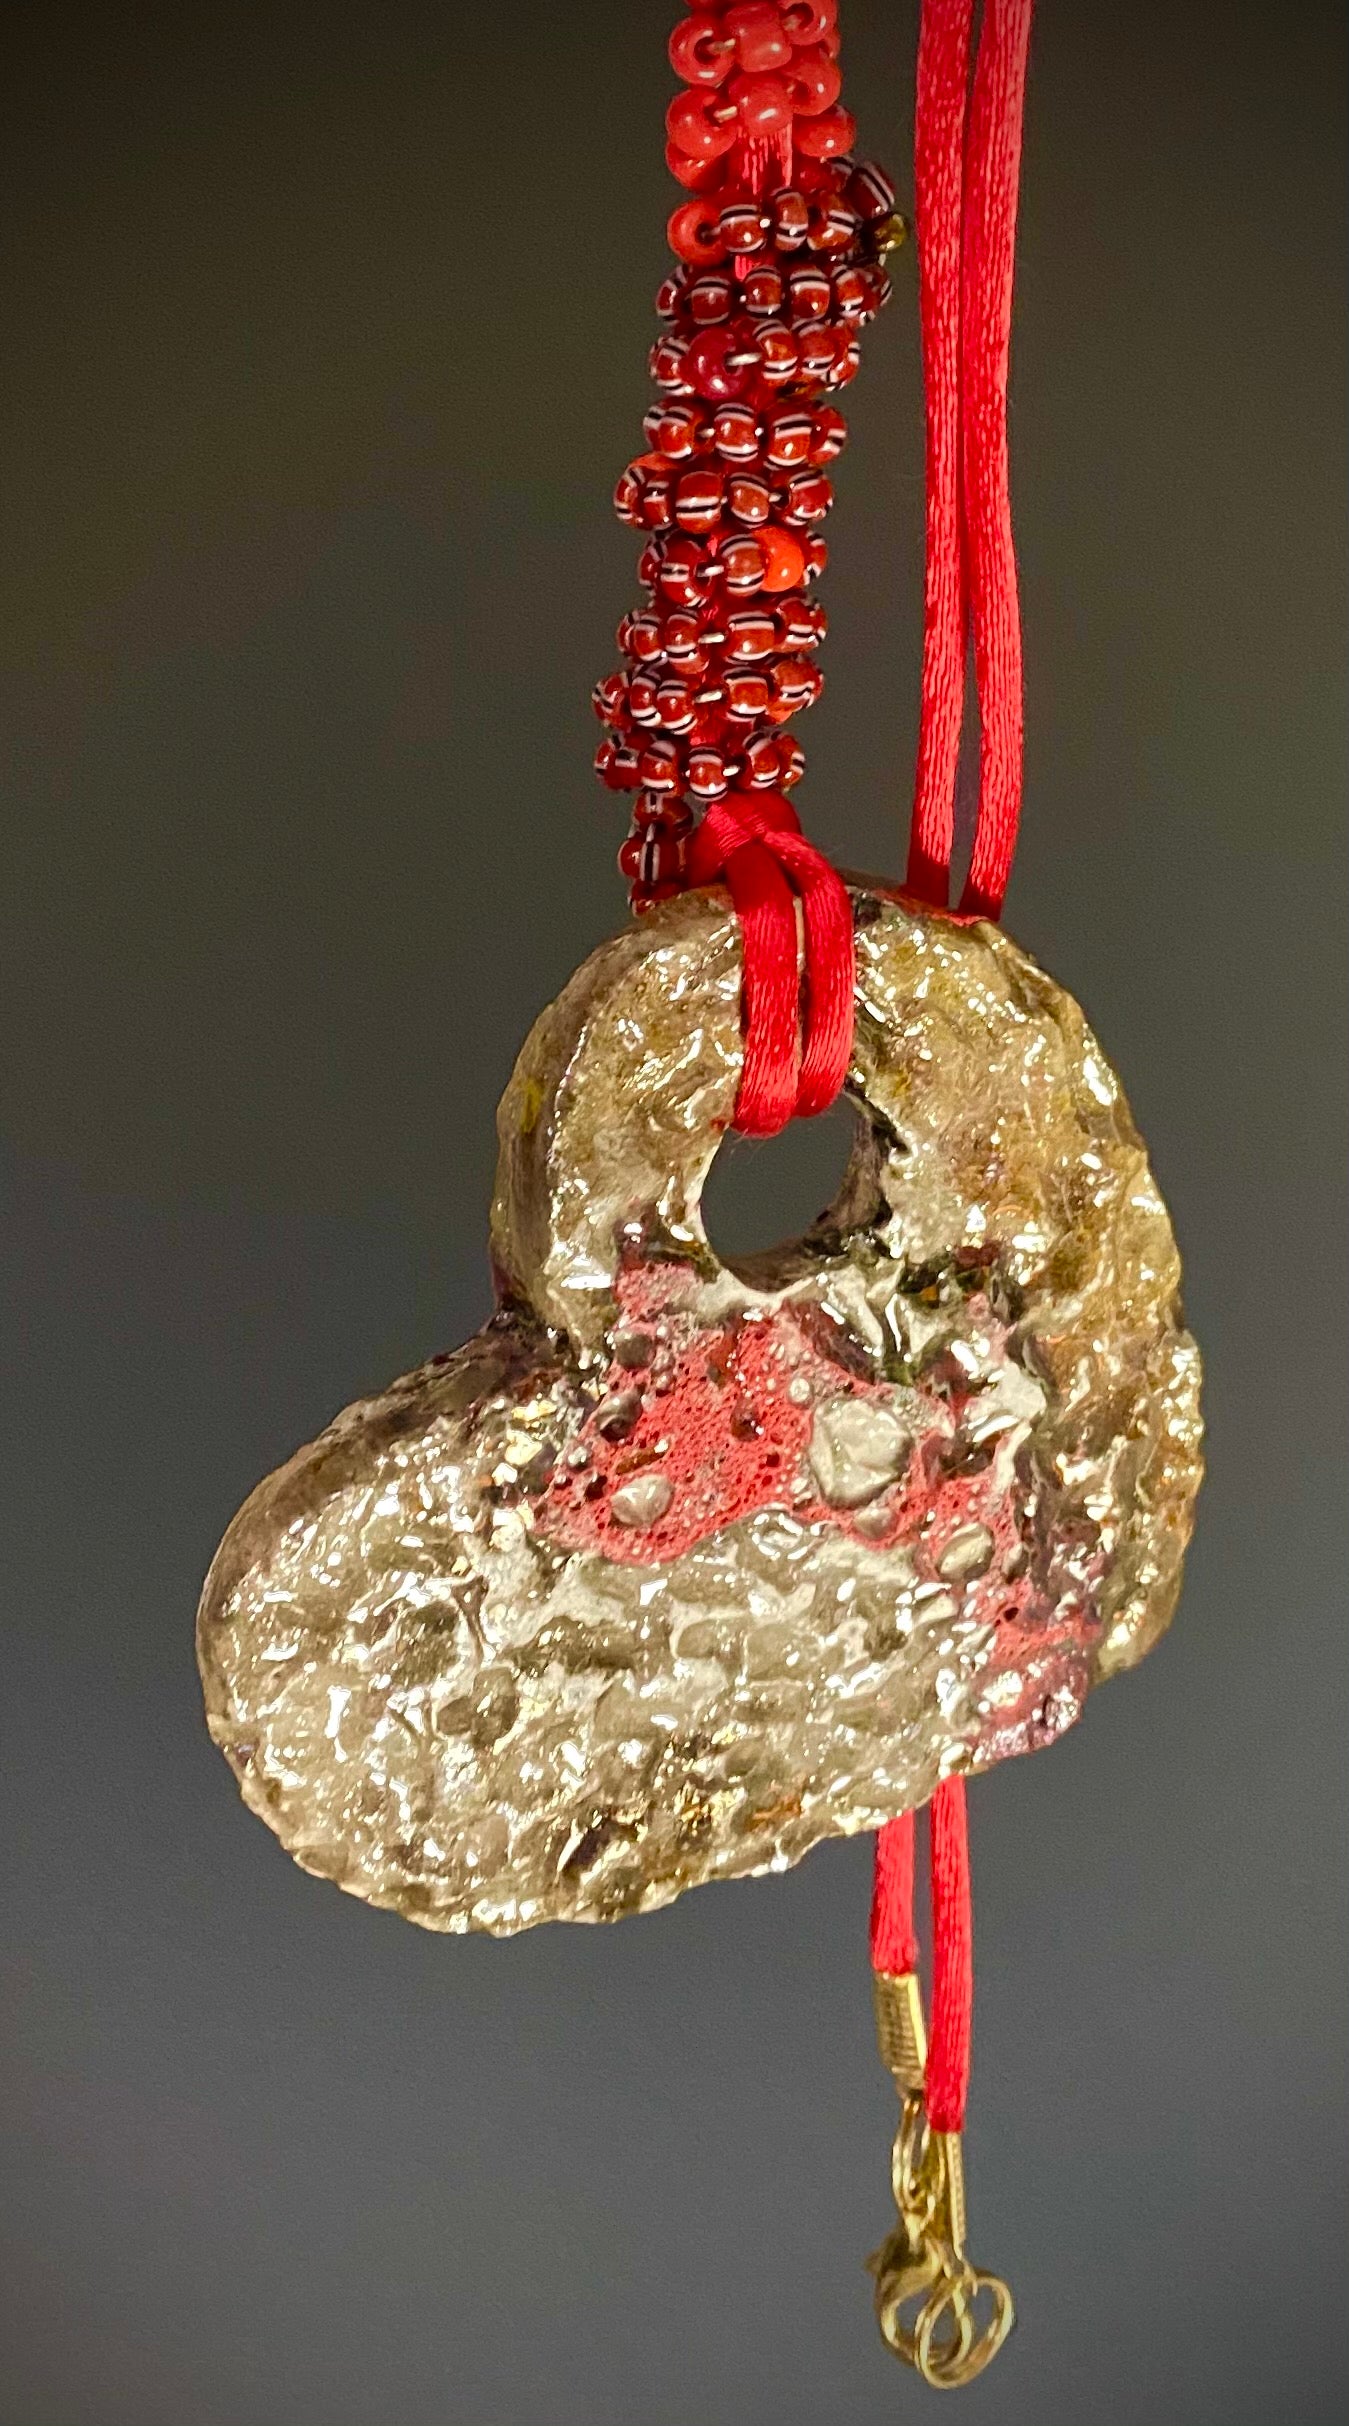 Have A Heart! Each heart pendant is handmade with love! It is 3"x 3"and weighs approx. 3ozs. This pendant has a red, white, and gold metallic raku glazes that renders a unique translucent  patina. The heart has a textured pattern . Both sides are  are different and equally beautiful! It holds a spiral of red and deep purple mini beads on a spiral copper wire. This pendant has a nice 12" red adjustable rattail cord!